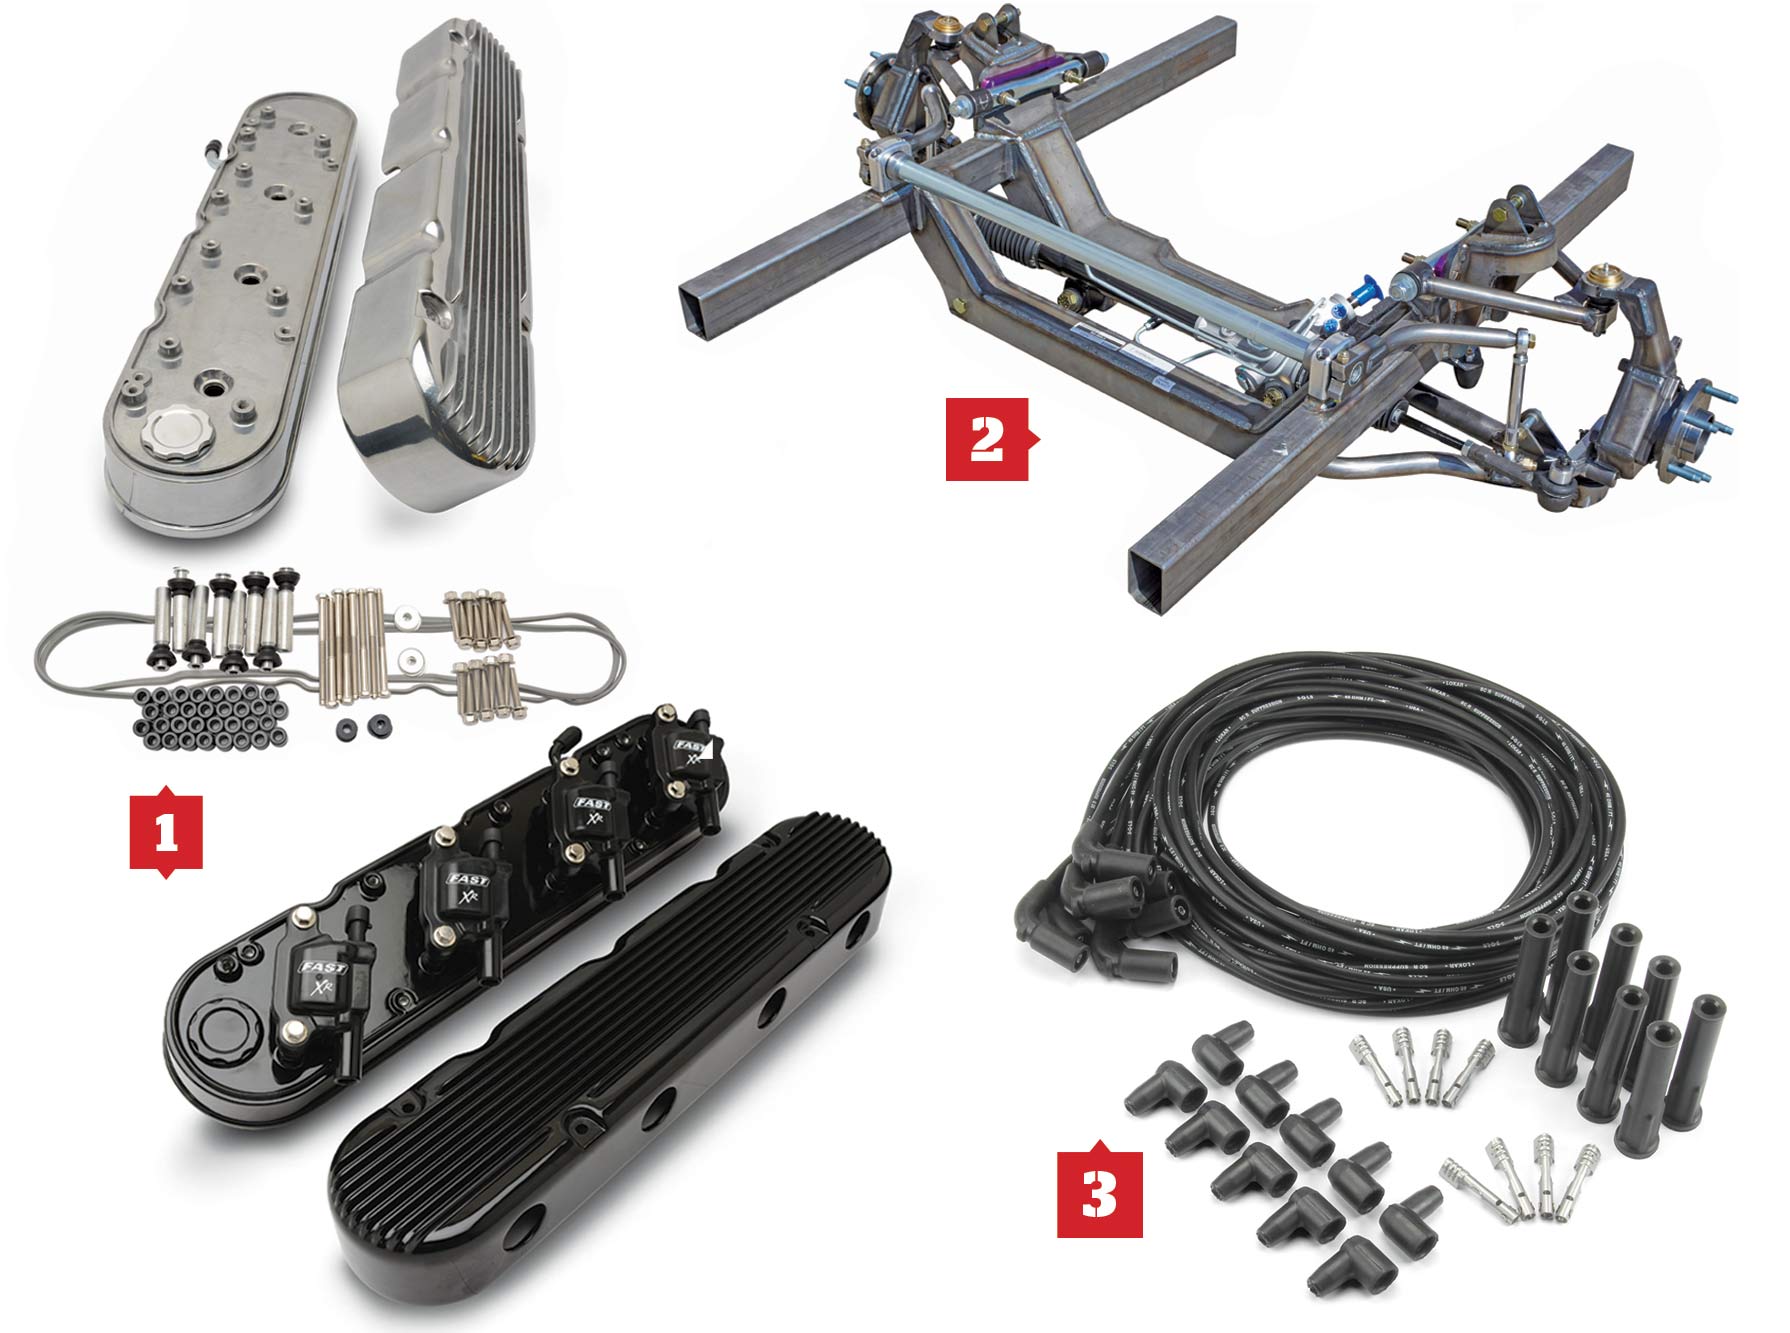 1. Finned LS Valve Covers; 2. G-Comp Suspension; 3. Hot wires